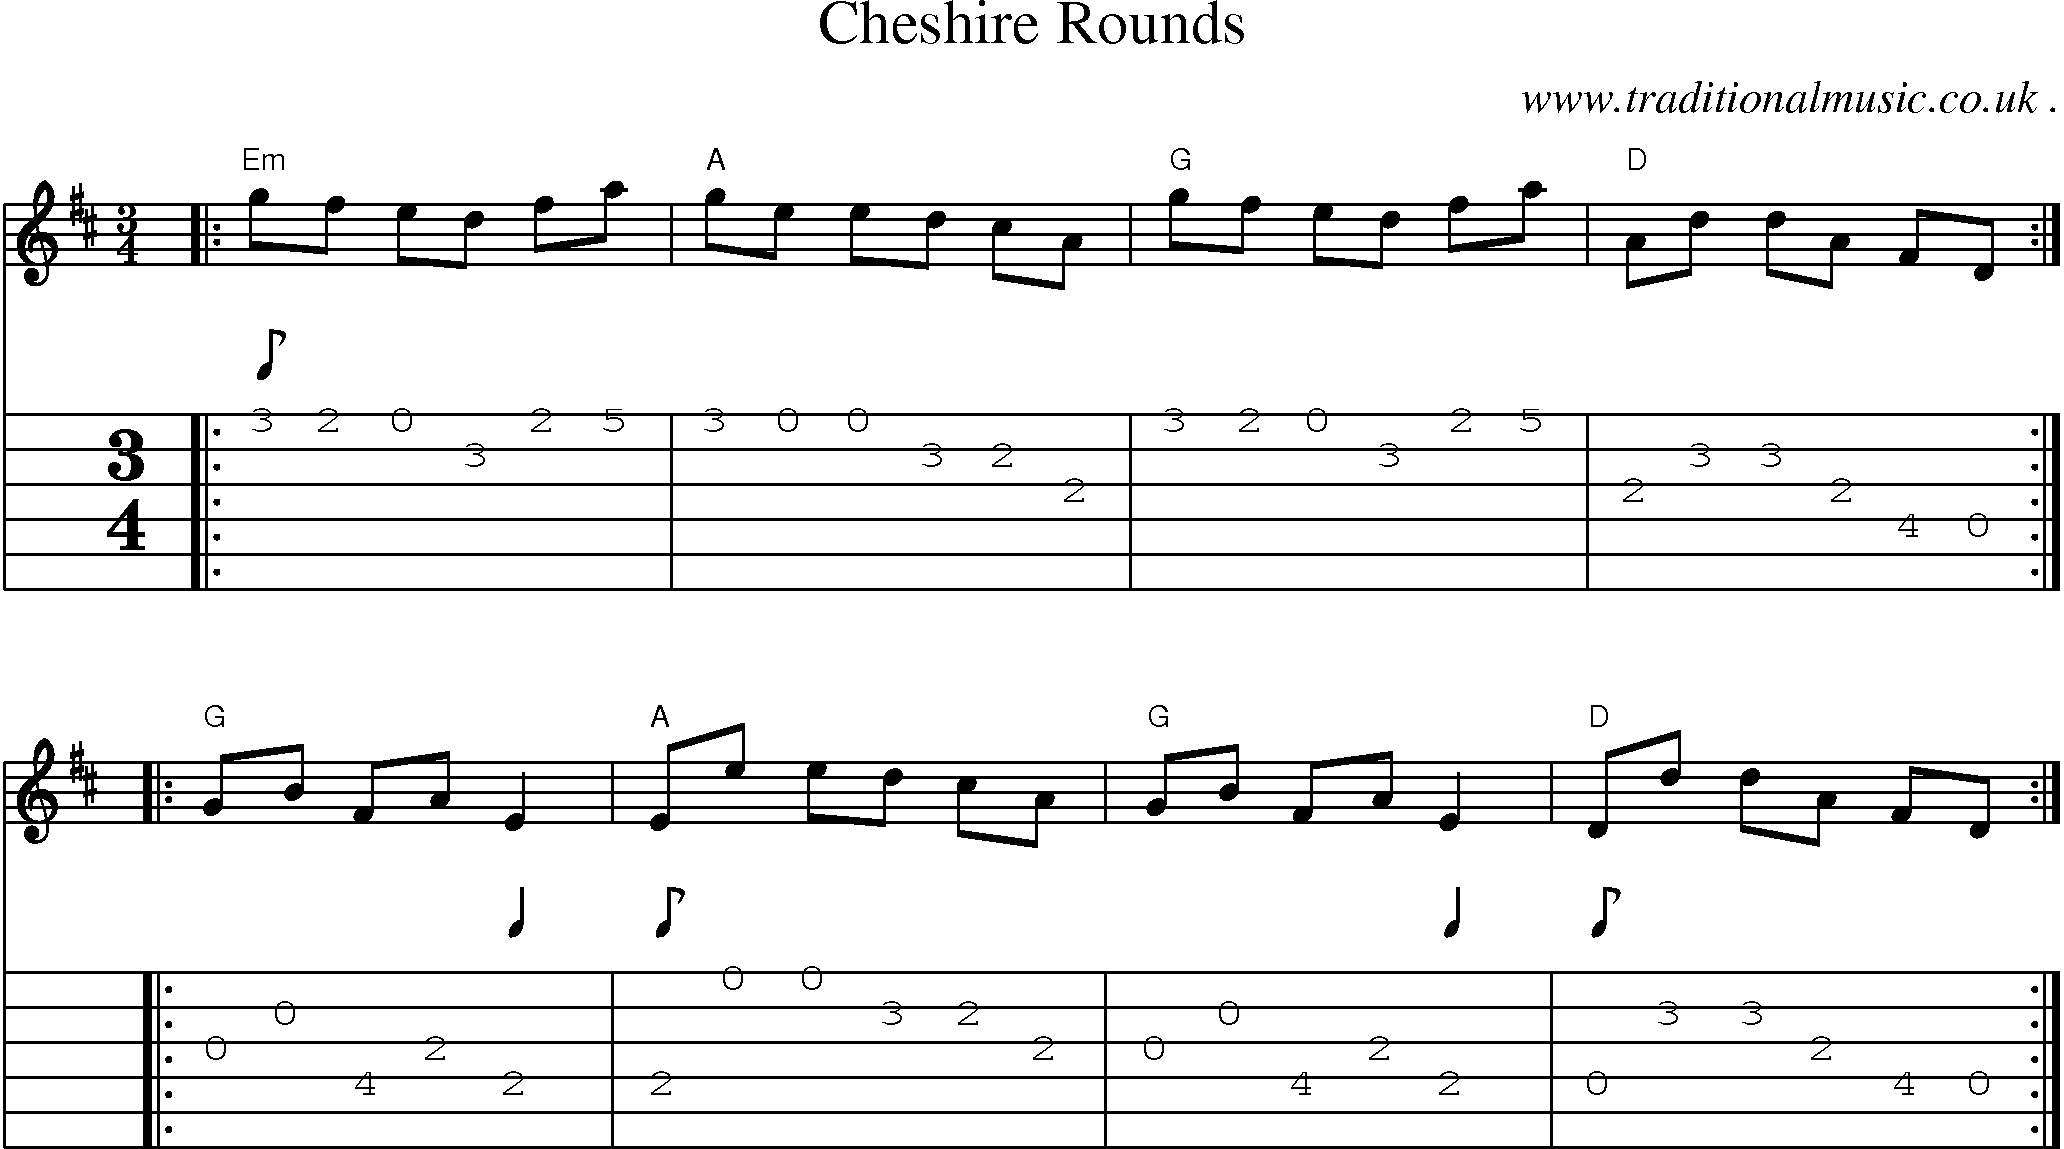 Music Score and Guitar Tabs for Cheshire Rounds